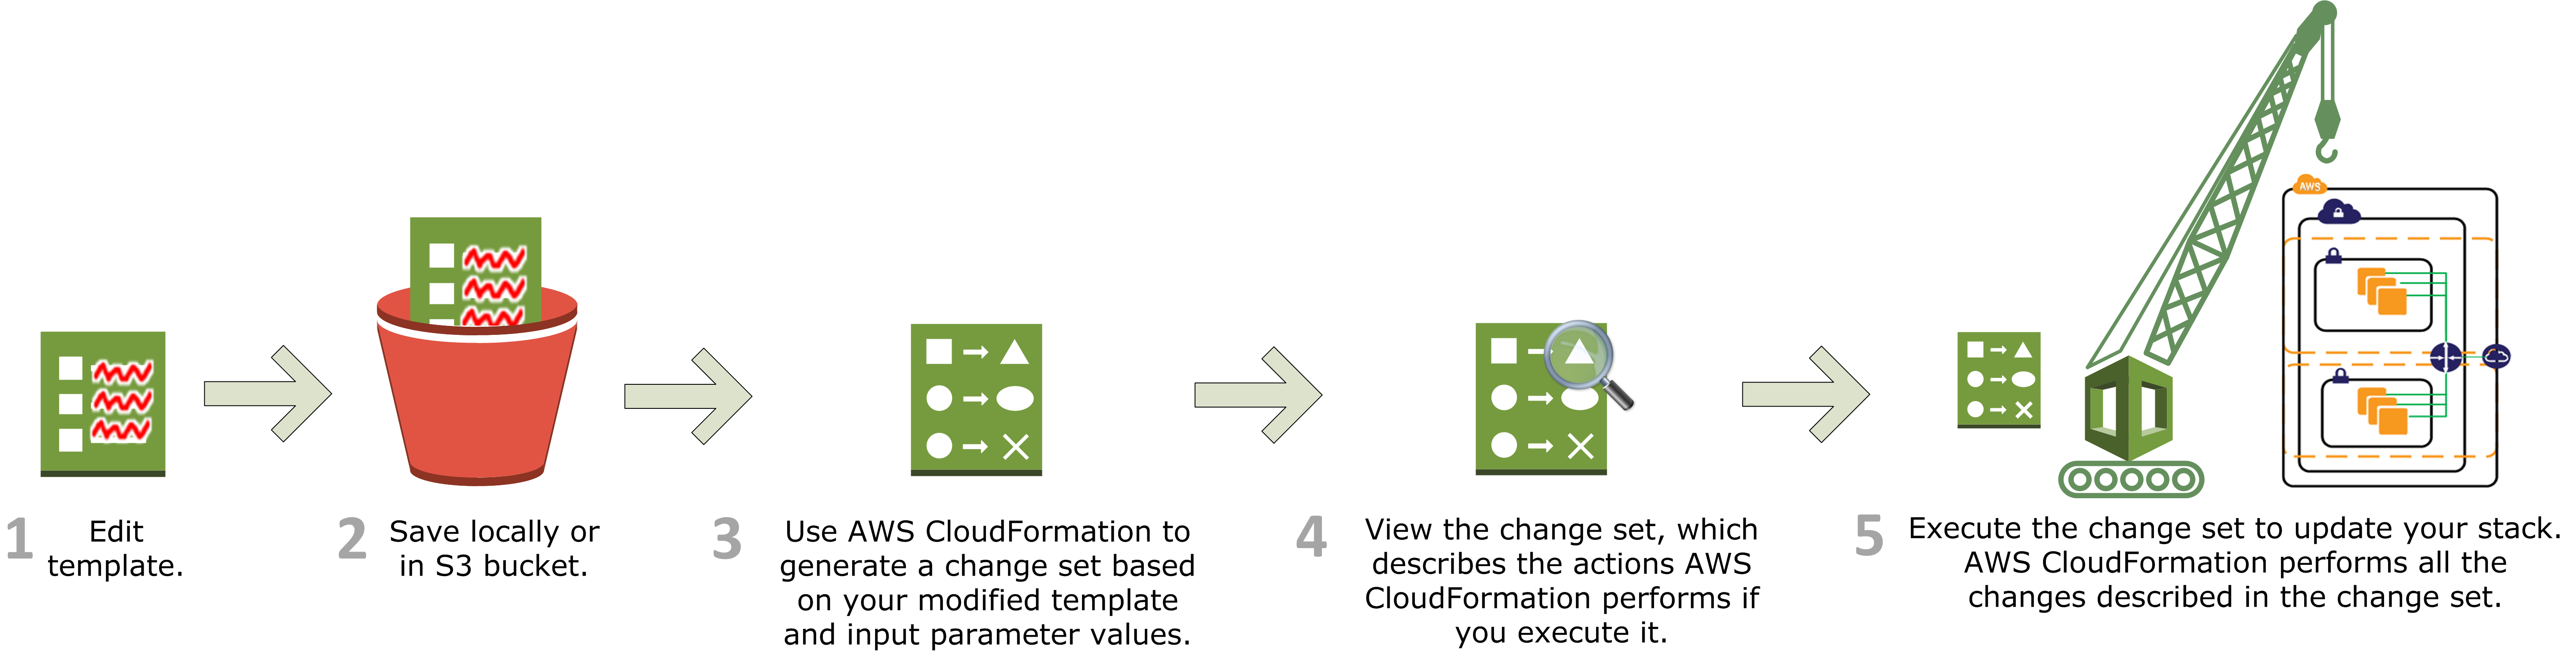 aws-cloudformation-update-stack-diagram